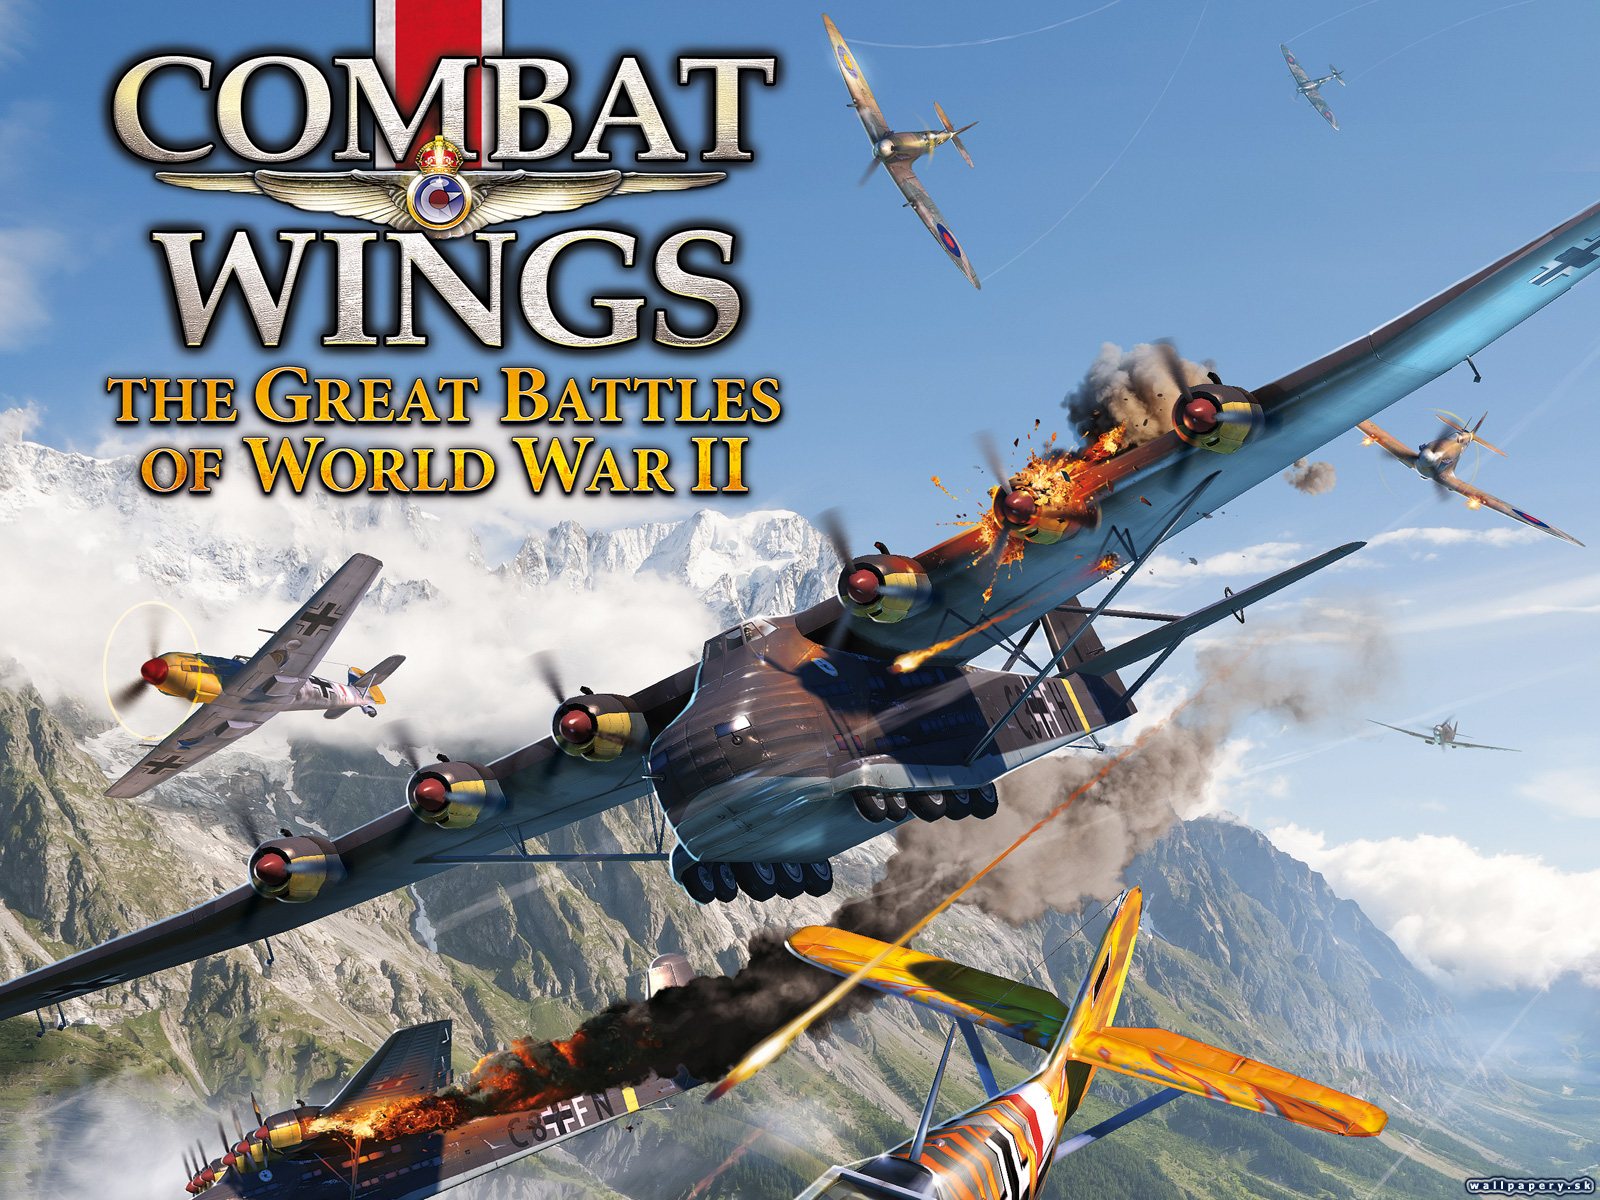 Combat Wings: The Great Battles of WWII - wallpaper 4